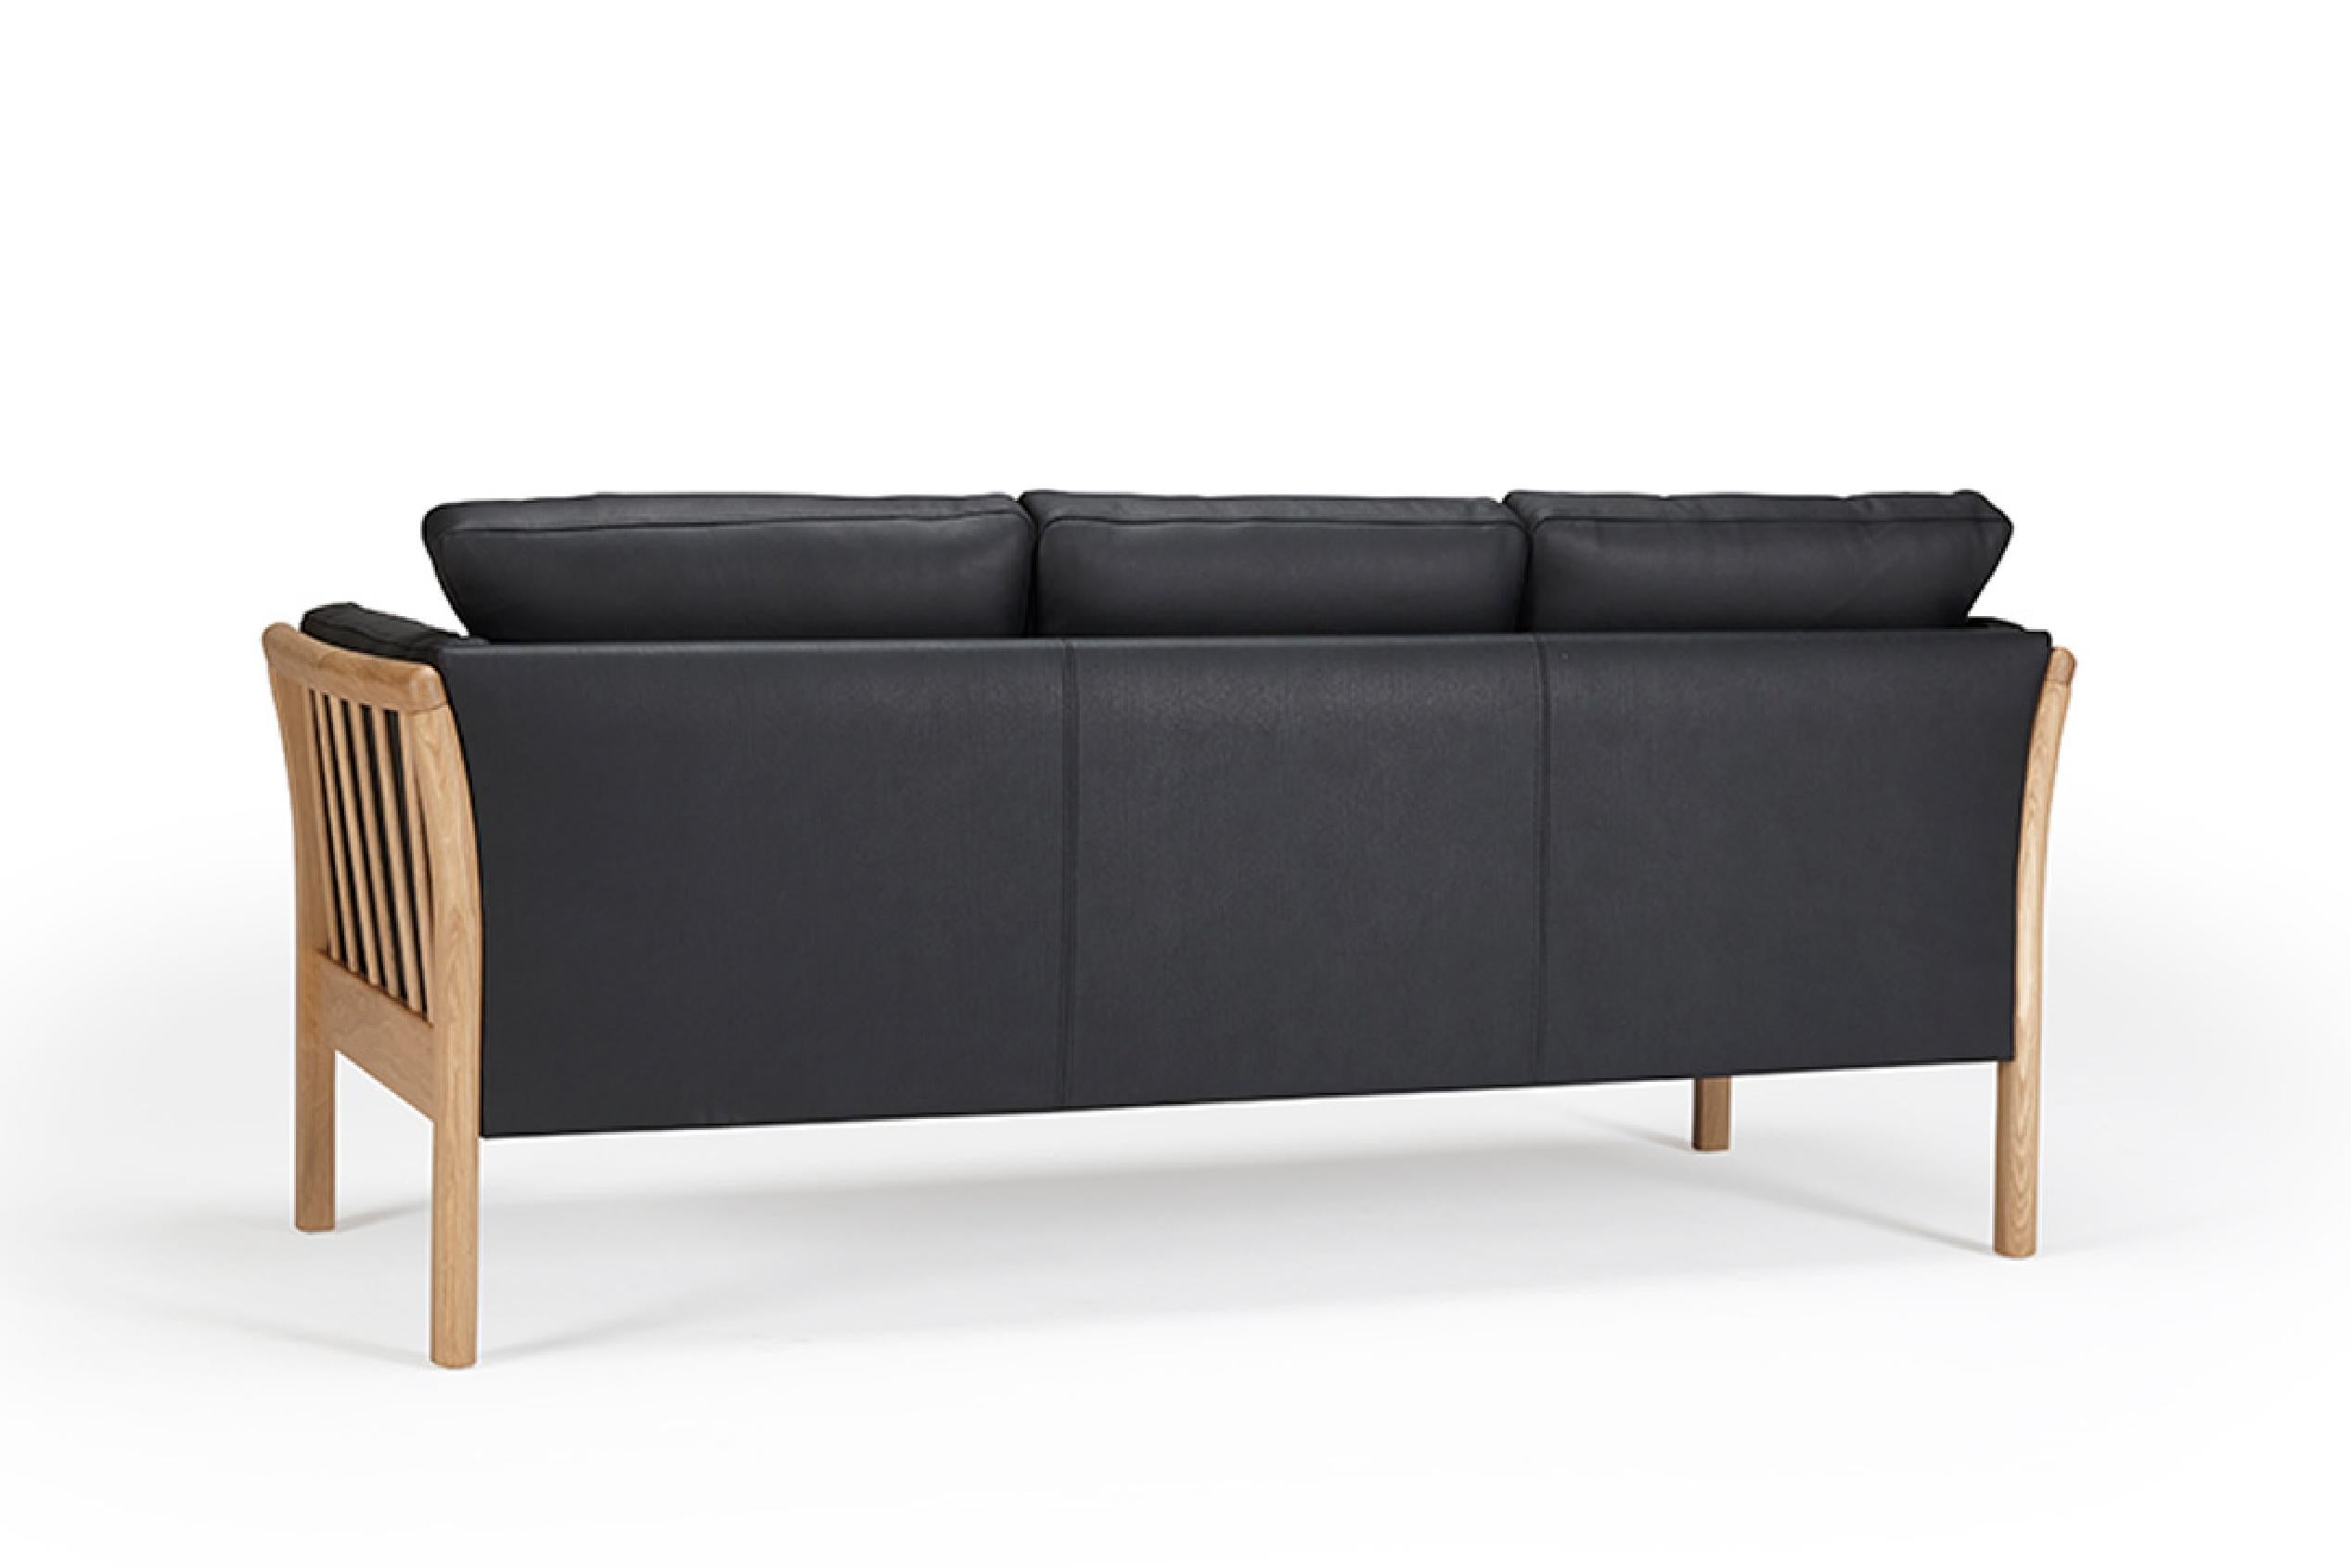 The Oscar 3 Seater Sofa captures the essence of classic mid-century Scandinavian modern design. This OEM product offers a range of wood finishes for the legs and a variety of fabric or leather upholstery options. Crafted with comfort in mind, it